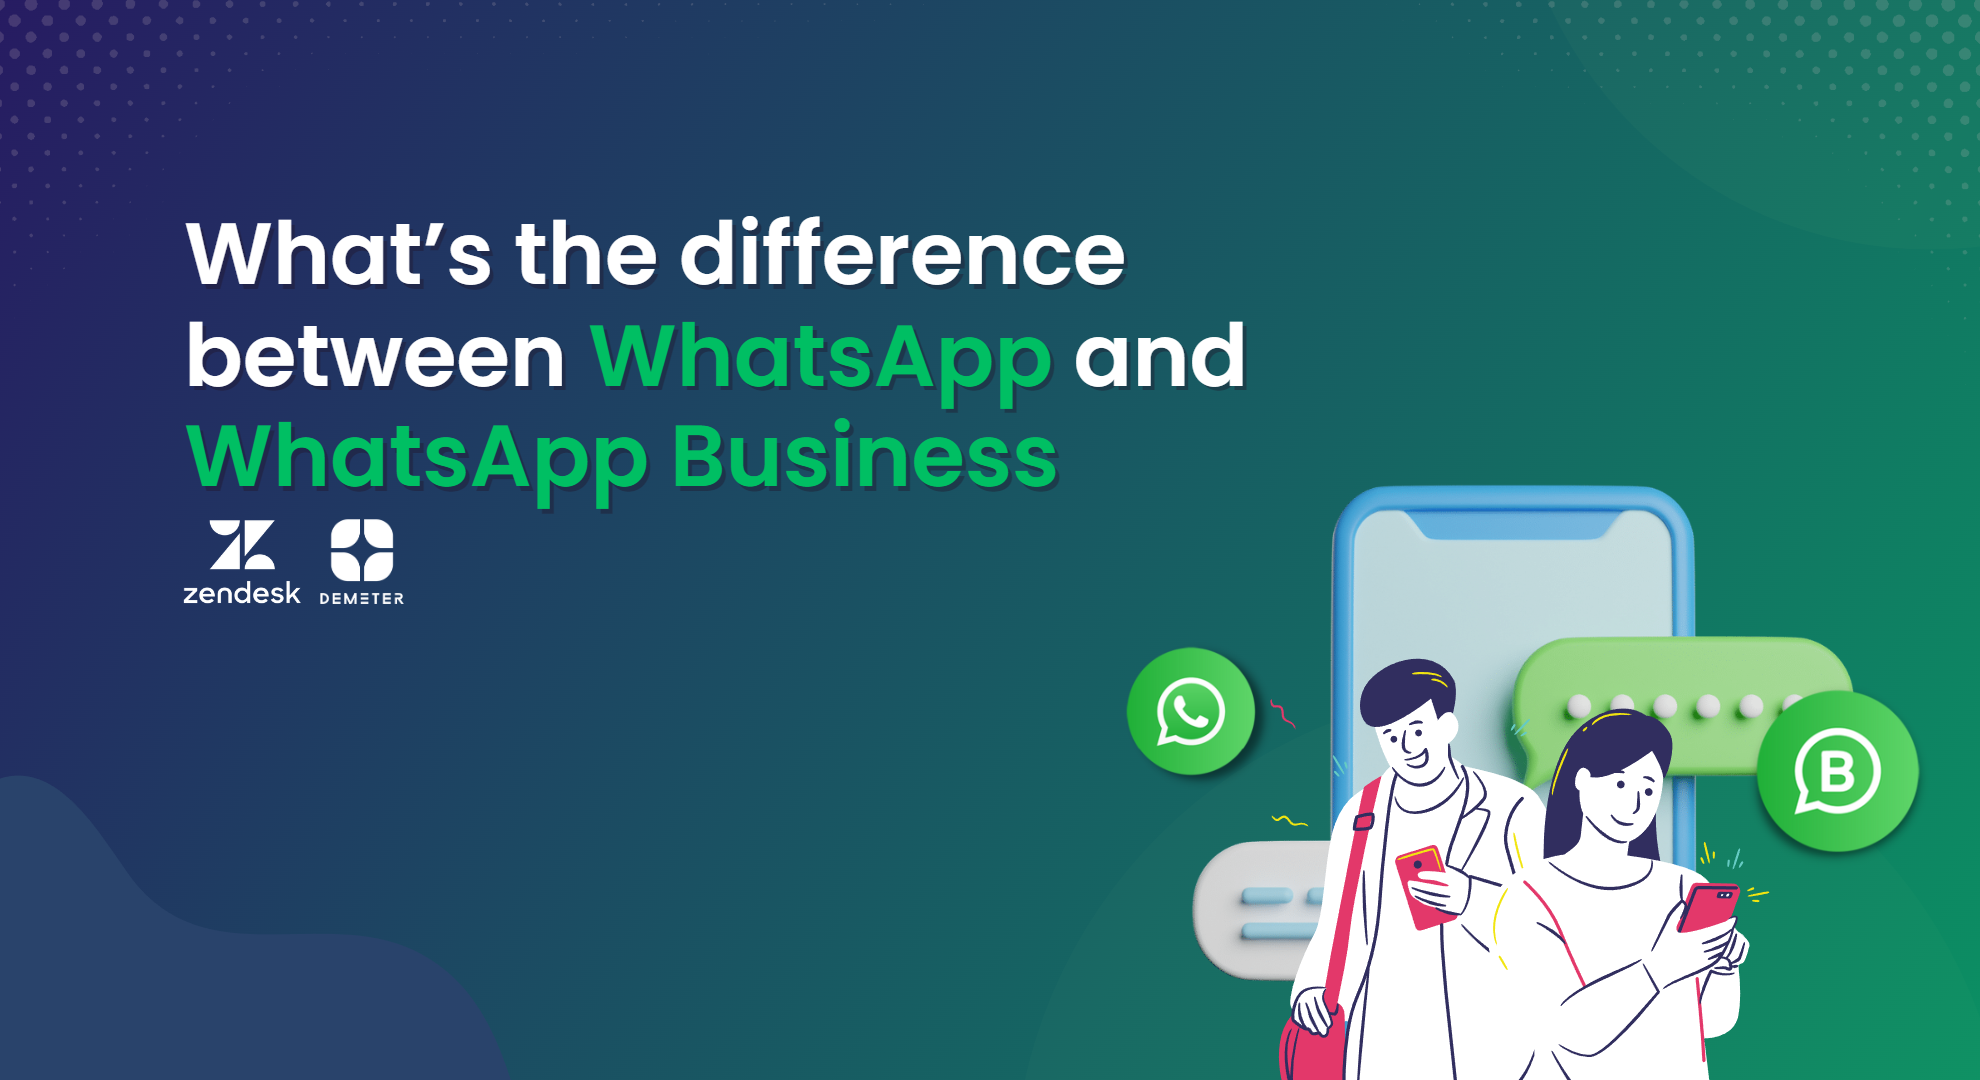 The difference between WhatsApp and WhatsApp Business